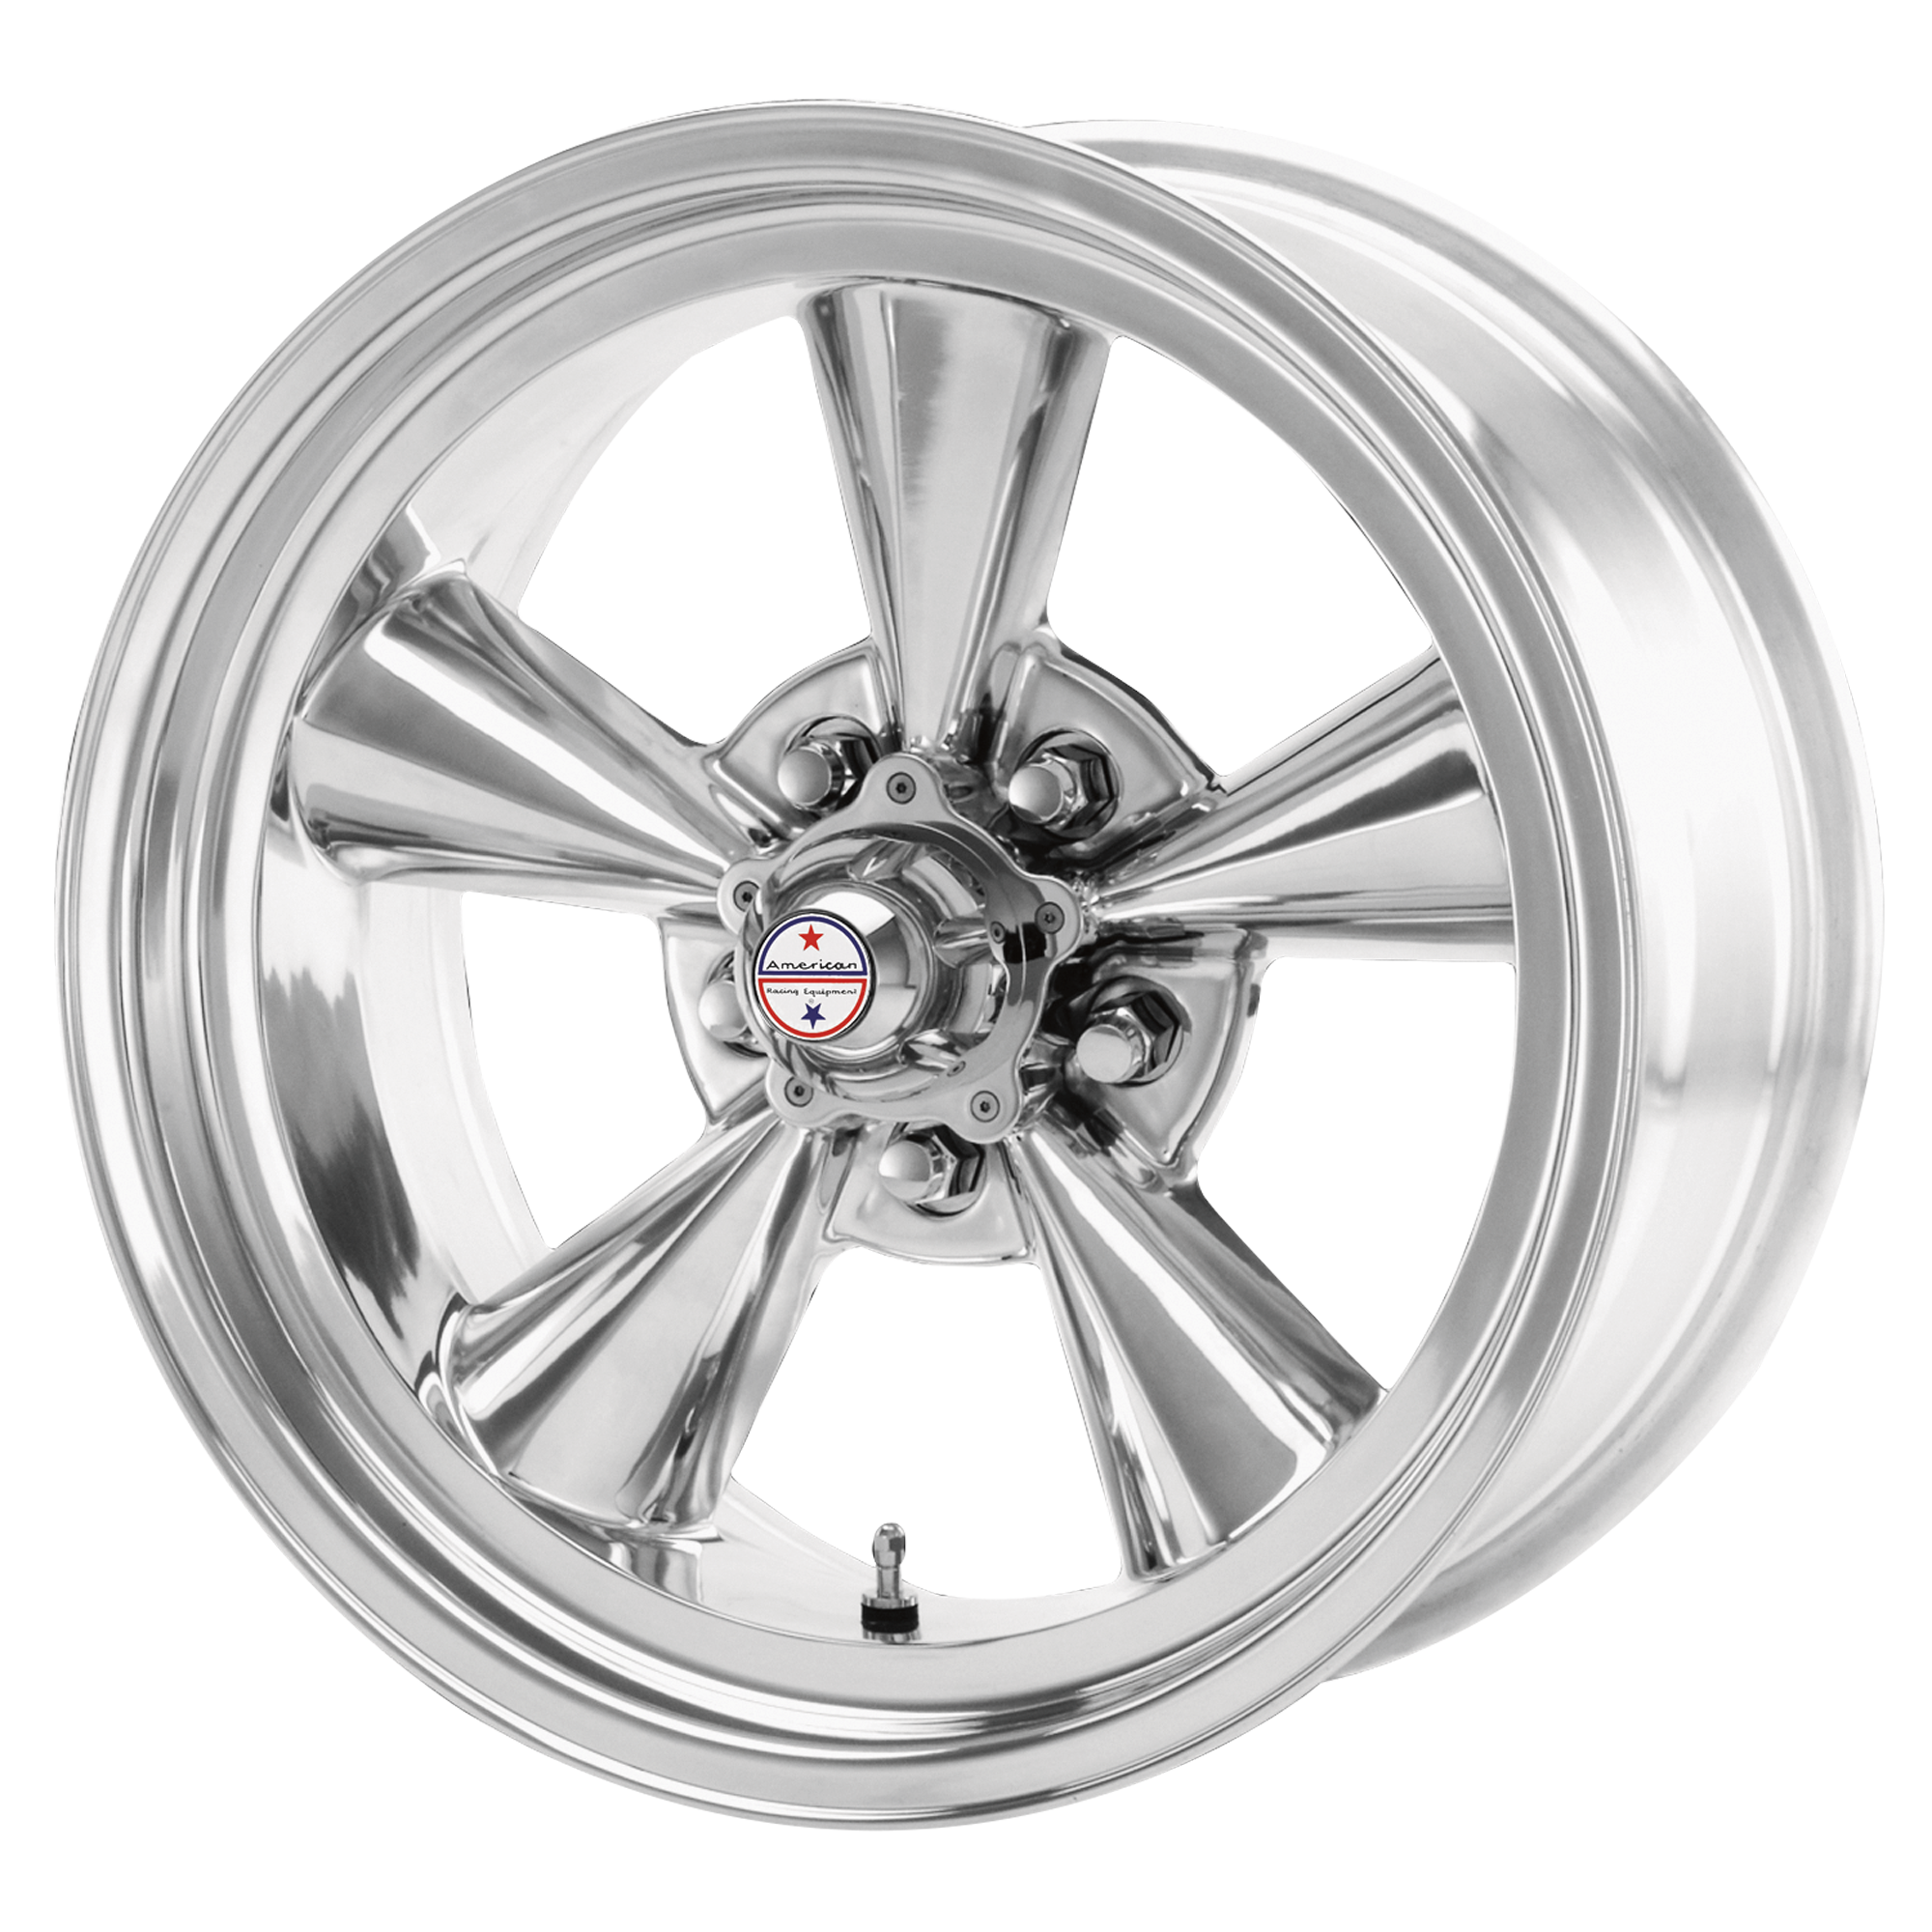 TT O 15x8.5 5x139.70 POLISHED (-24 mm) - Tires and Engine Performance